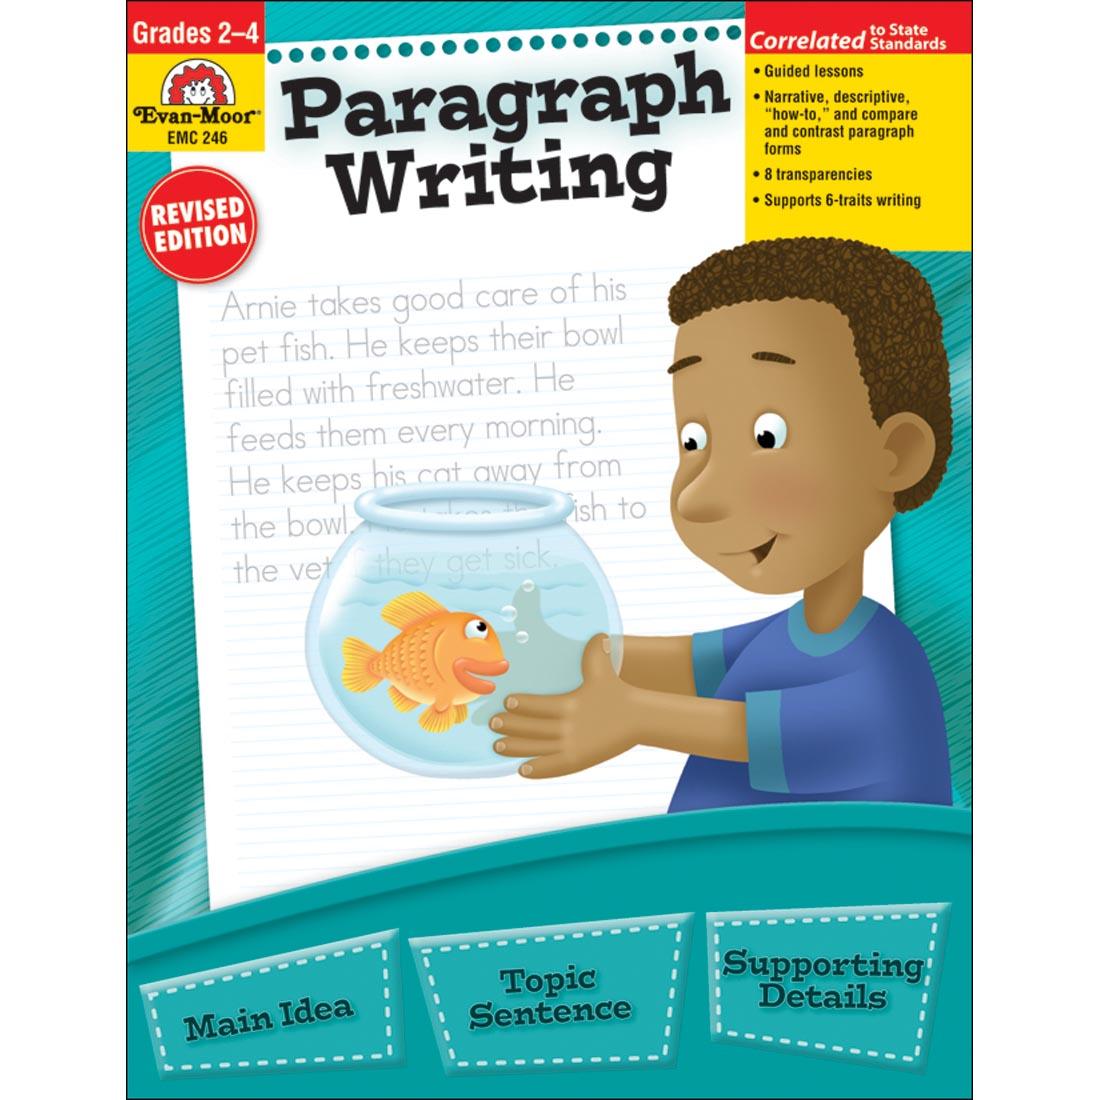 Paragraph Writing Book by Evan-Moor